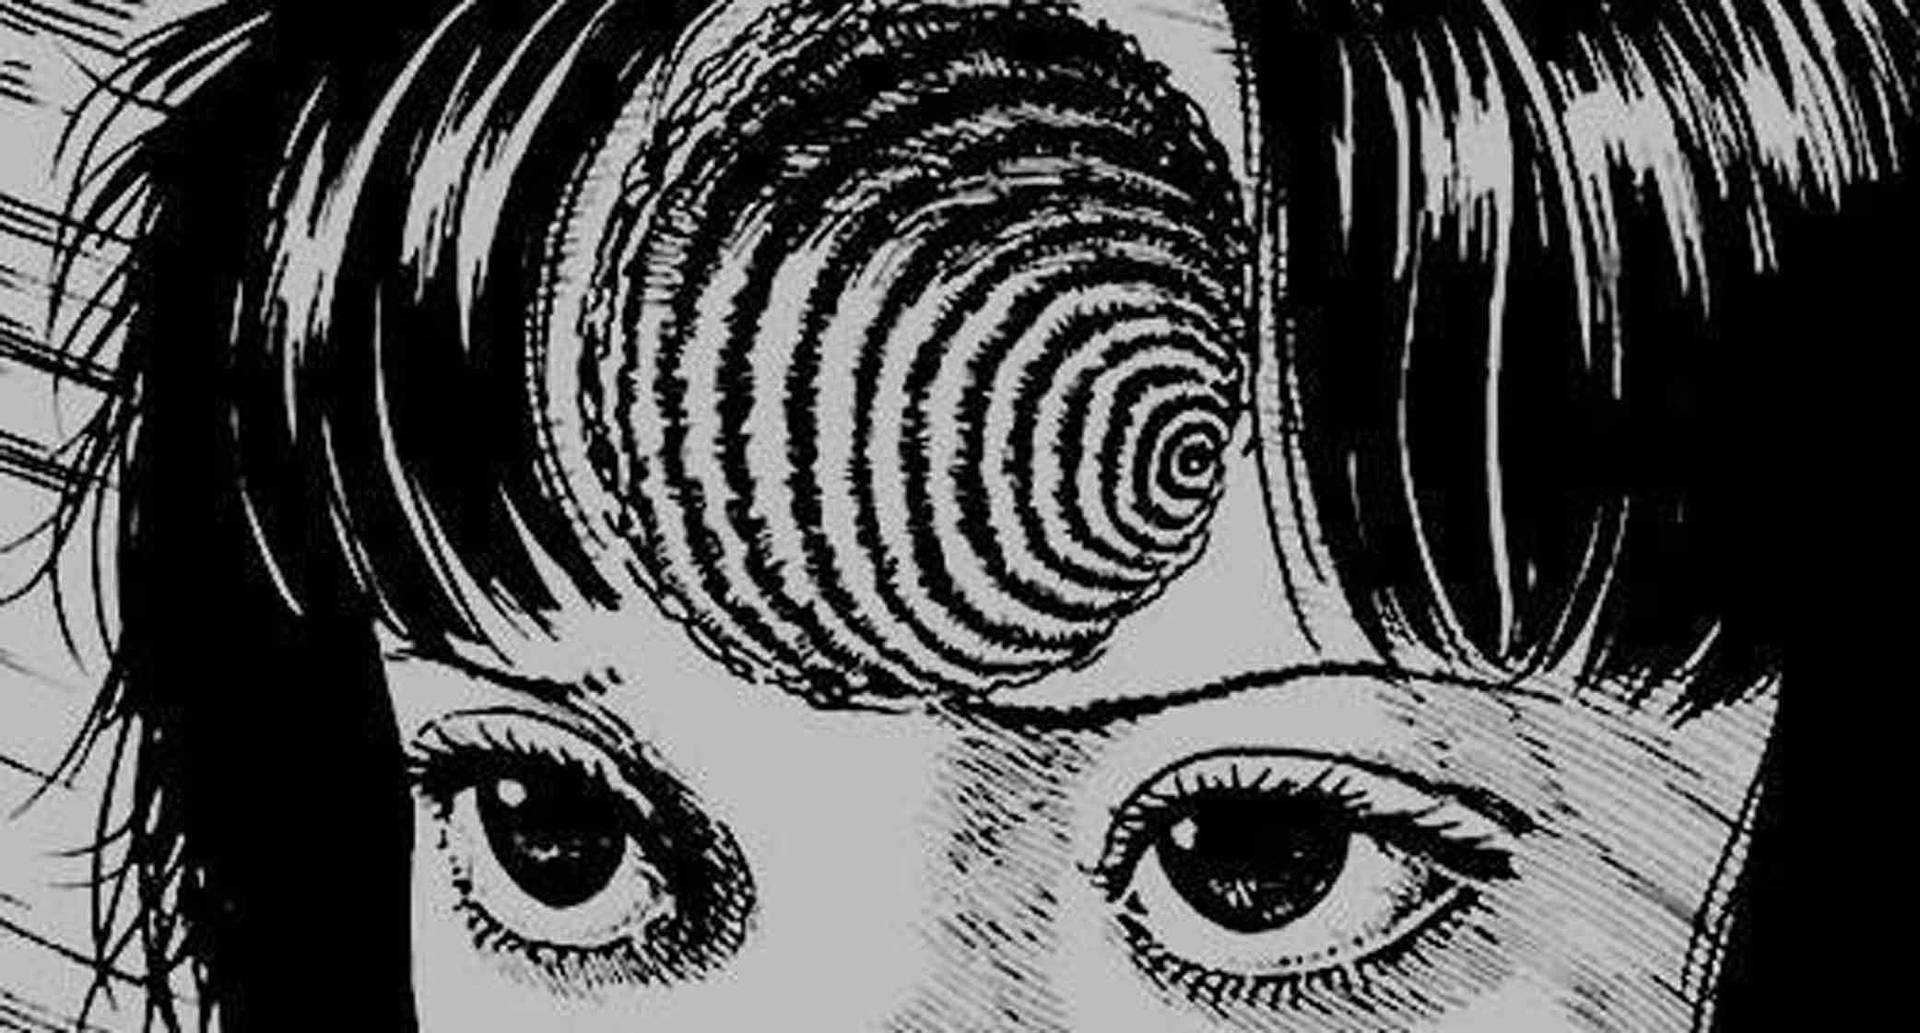 The Art of the Spiral (Juniji Ito's Uzumaki), by Angel D